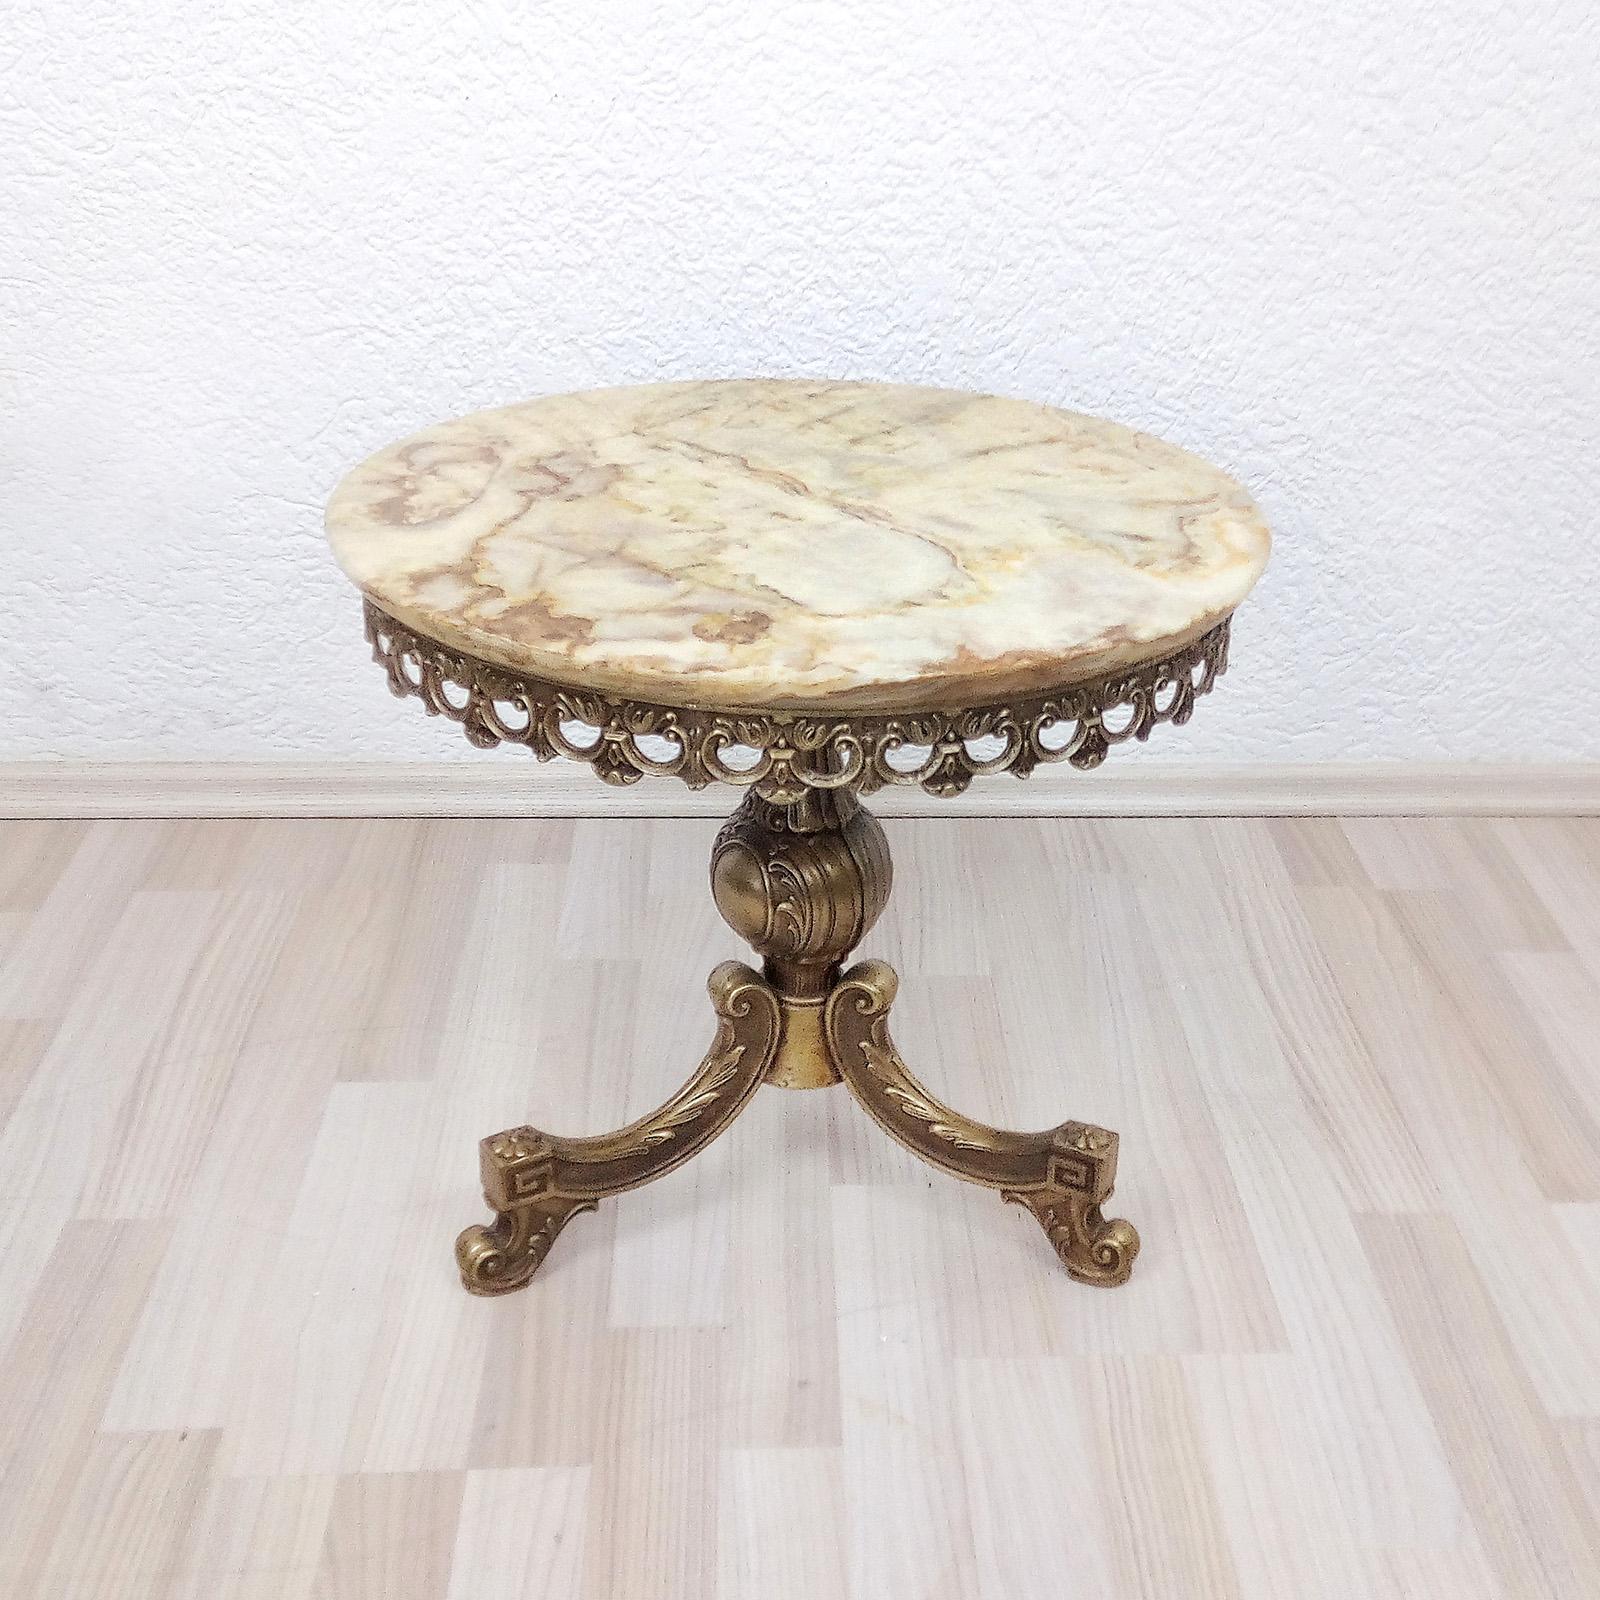 European Neoclassical Gueridon Gilt Metal Foot and Marble Top For Sale